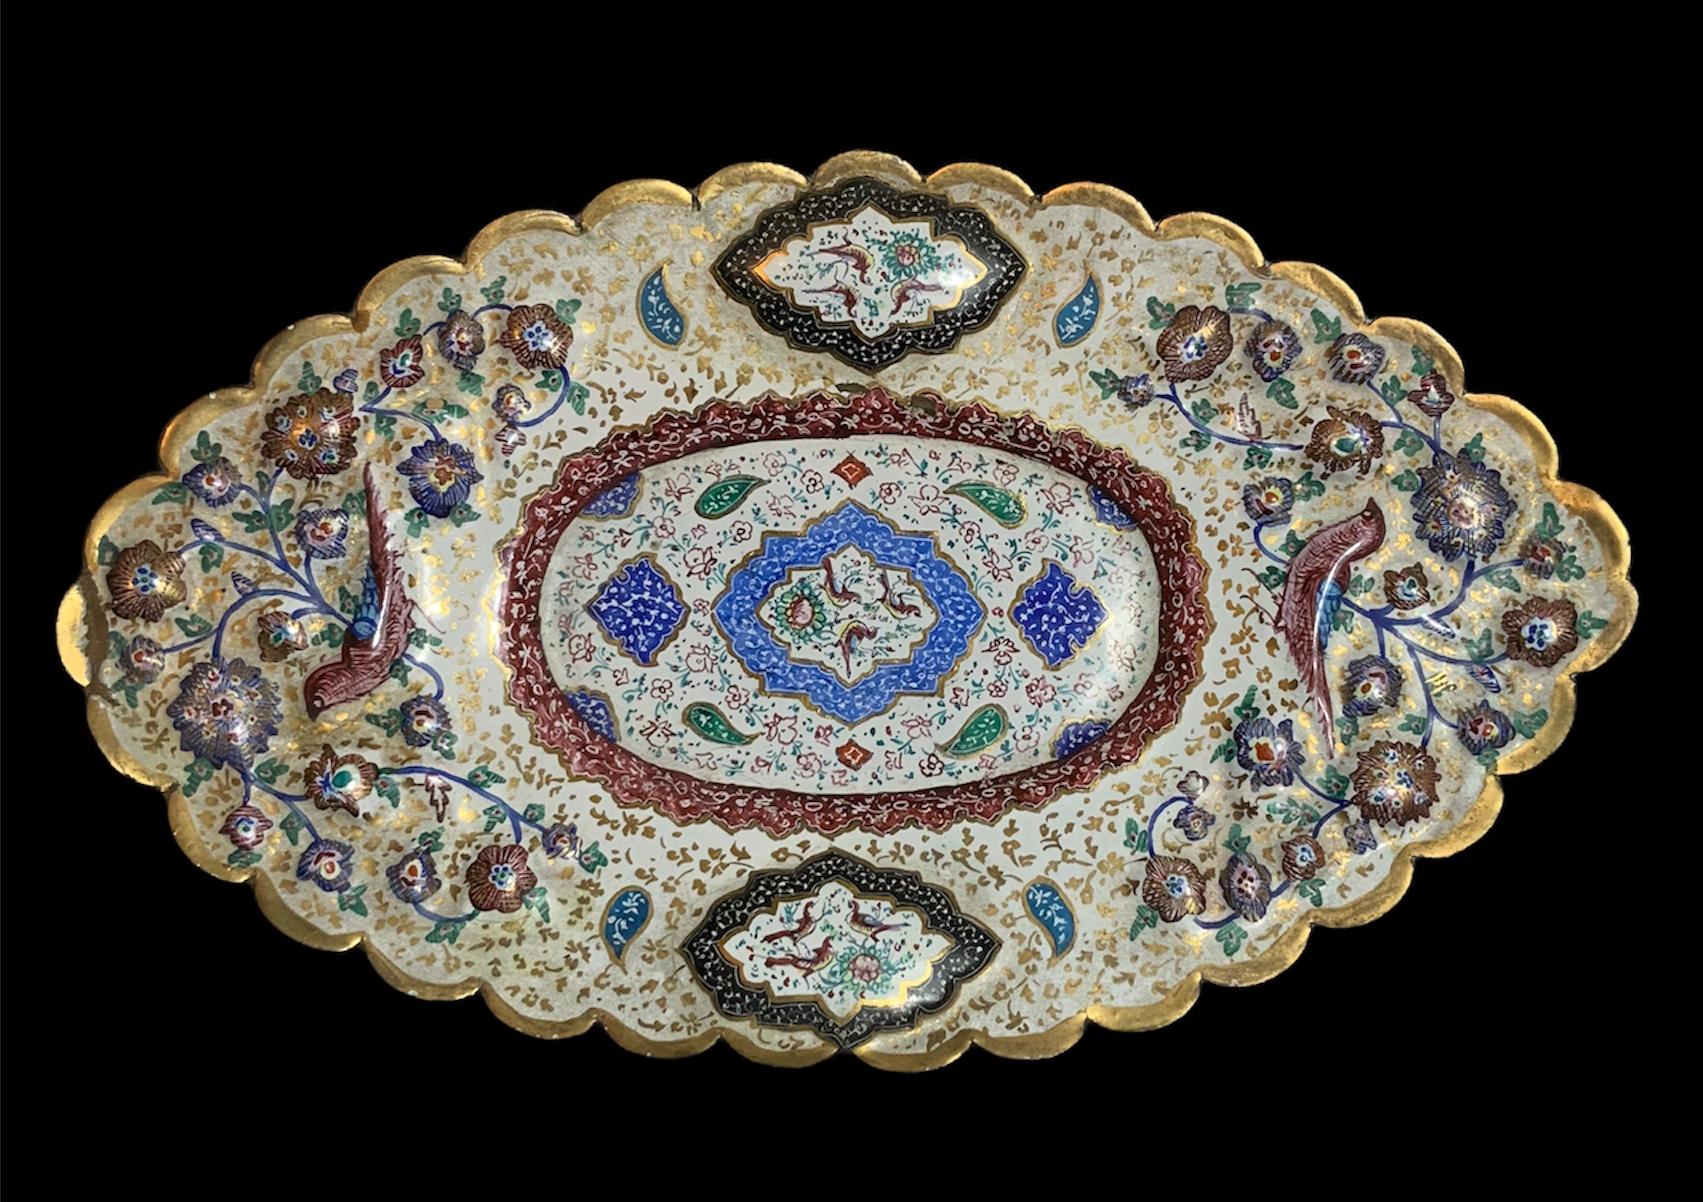 Persian Hand Painted Enameled Copper Kashkul Bowl and Plate 7